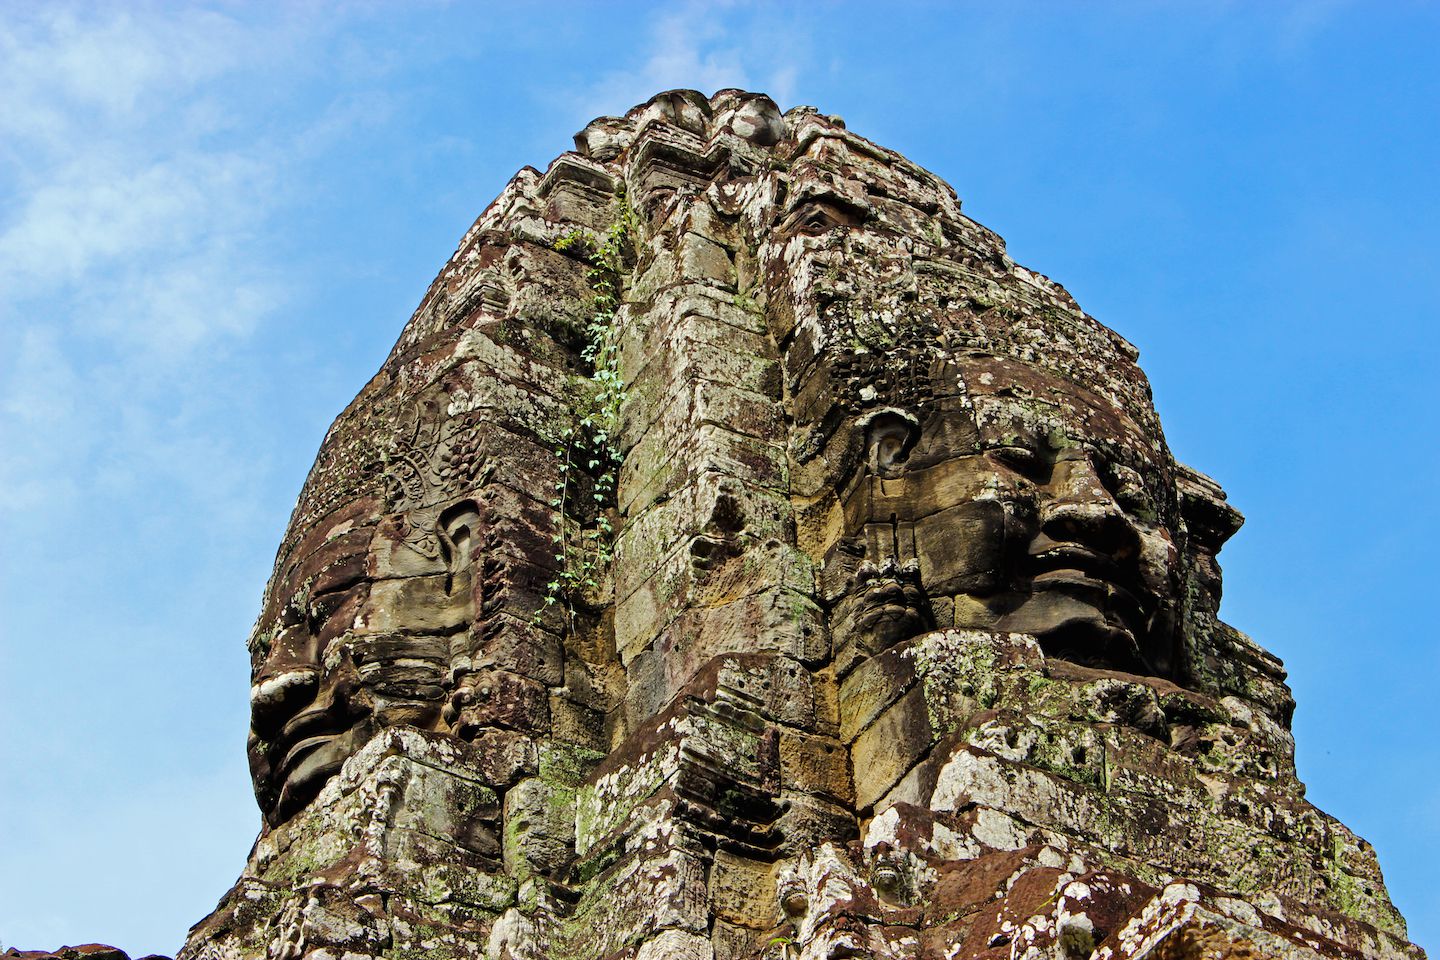 Close up of the face tower of the Bayon